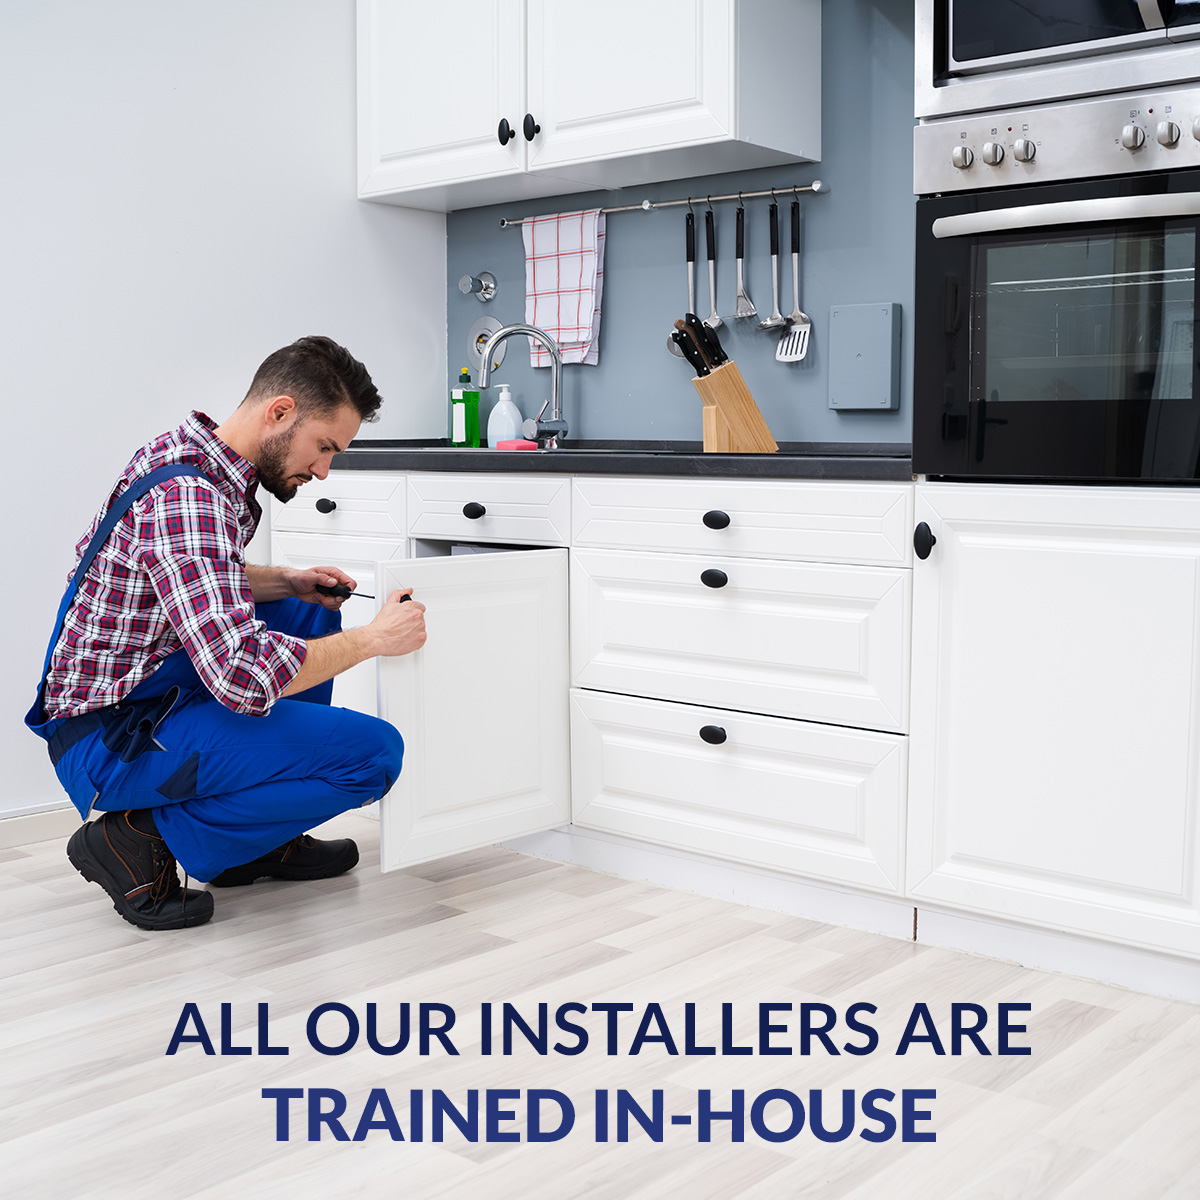 All Our Installers Are Trained In-House